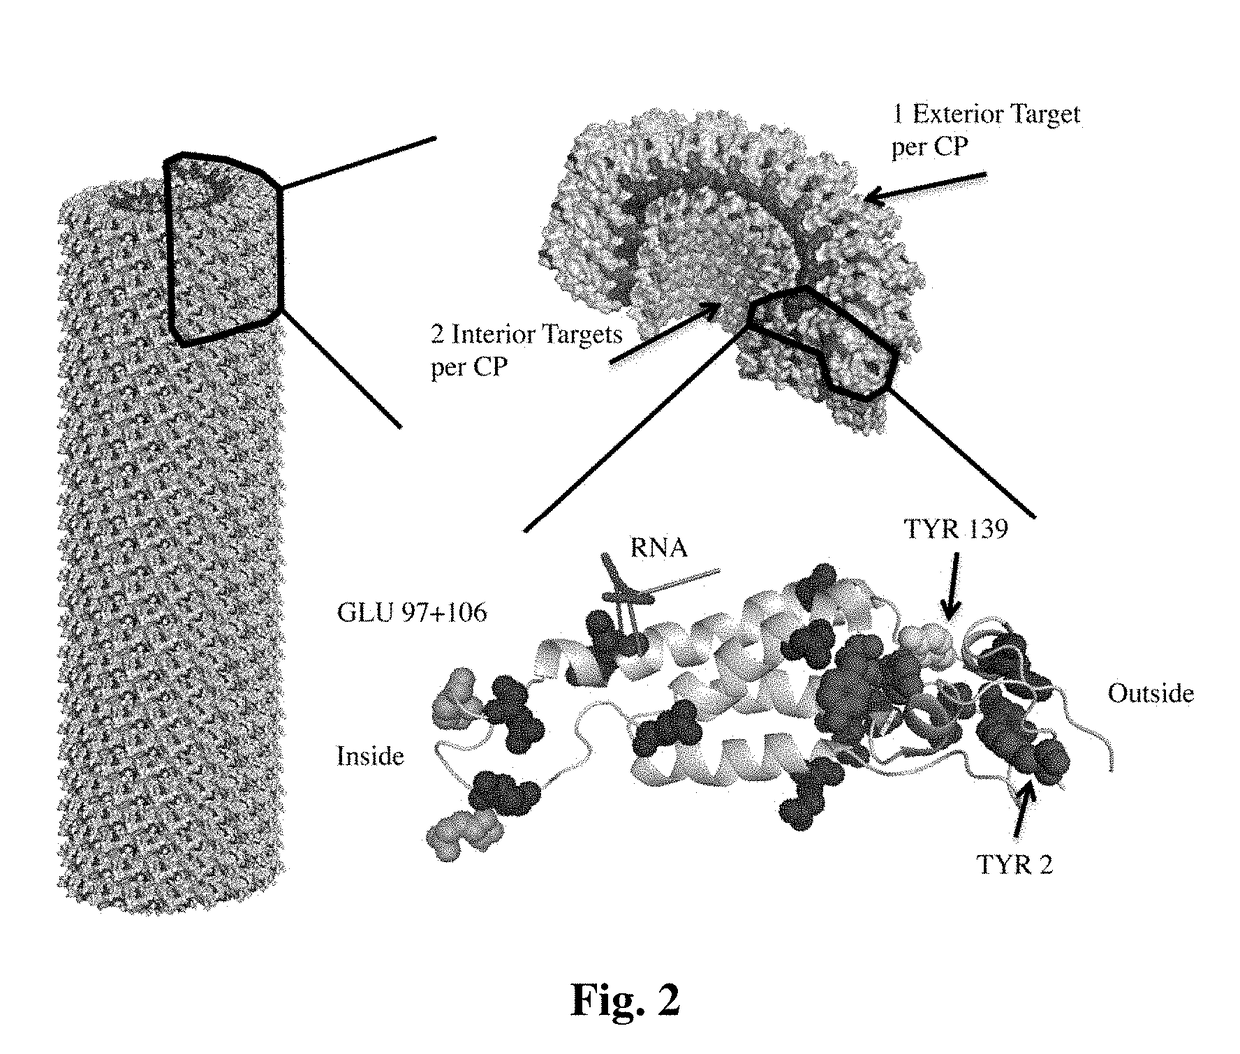 Rod-shaped plant virus nanoparticles as imaging agent platforms